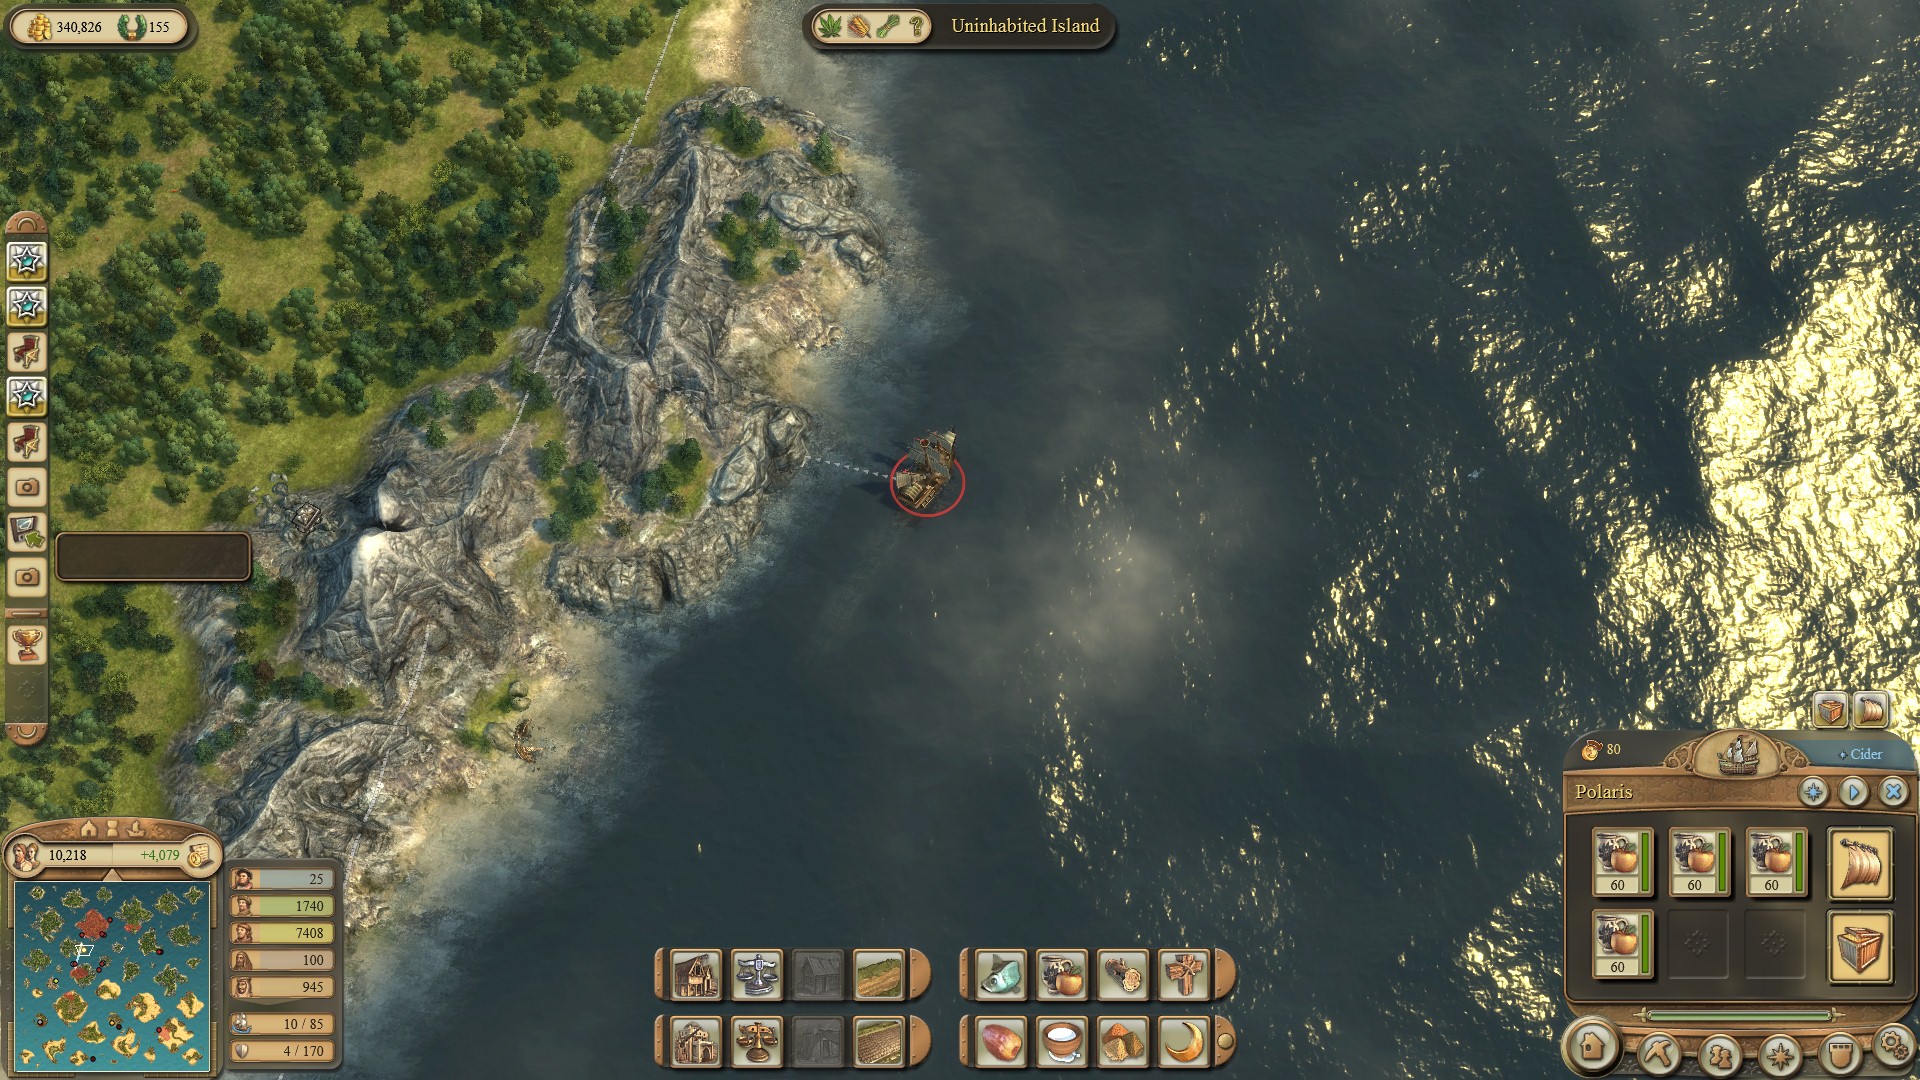 anno 1701 a.d. guide tips